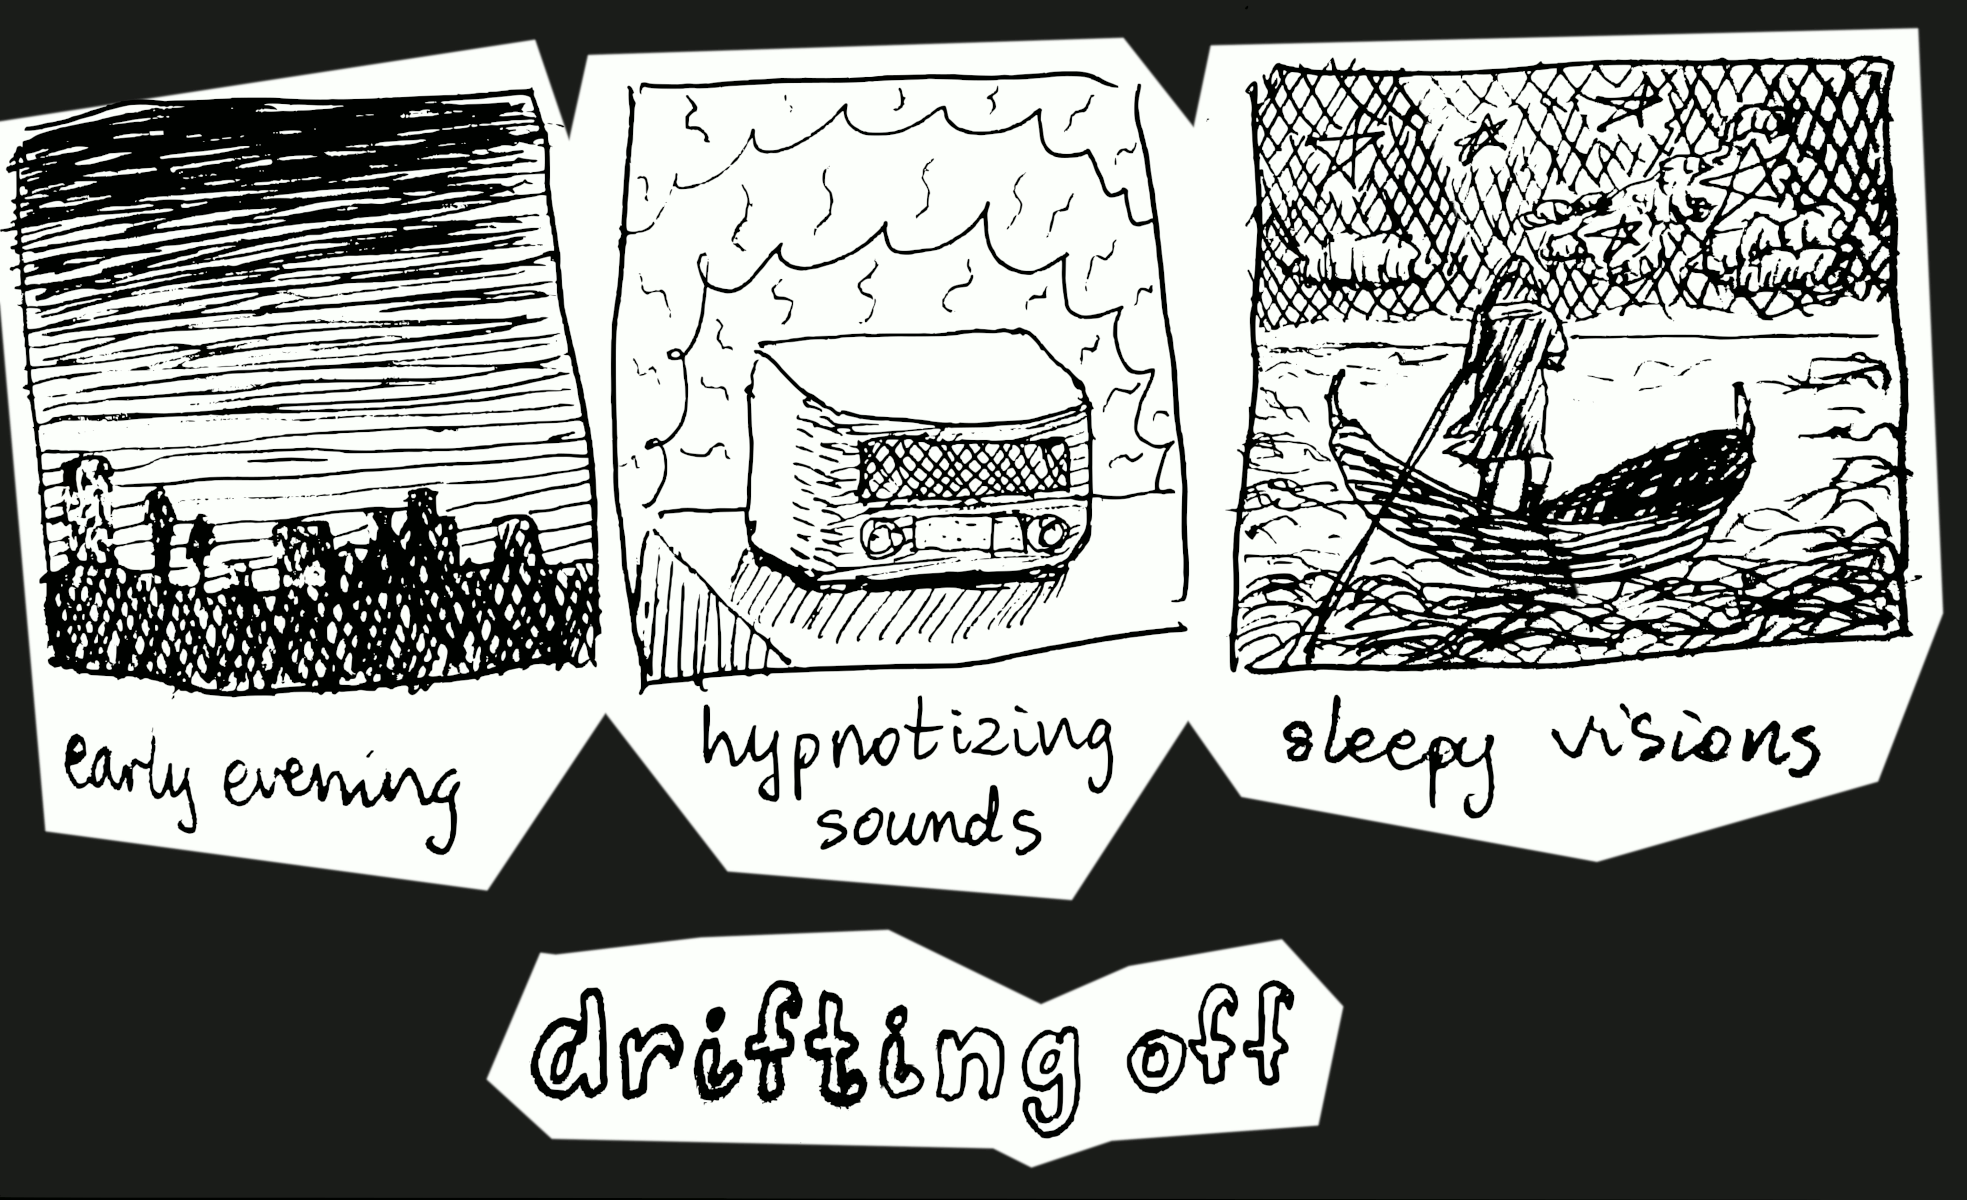 drifting off: early evening // hypnotizing sounds // sleepy visions